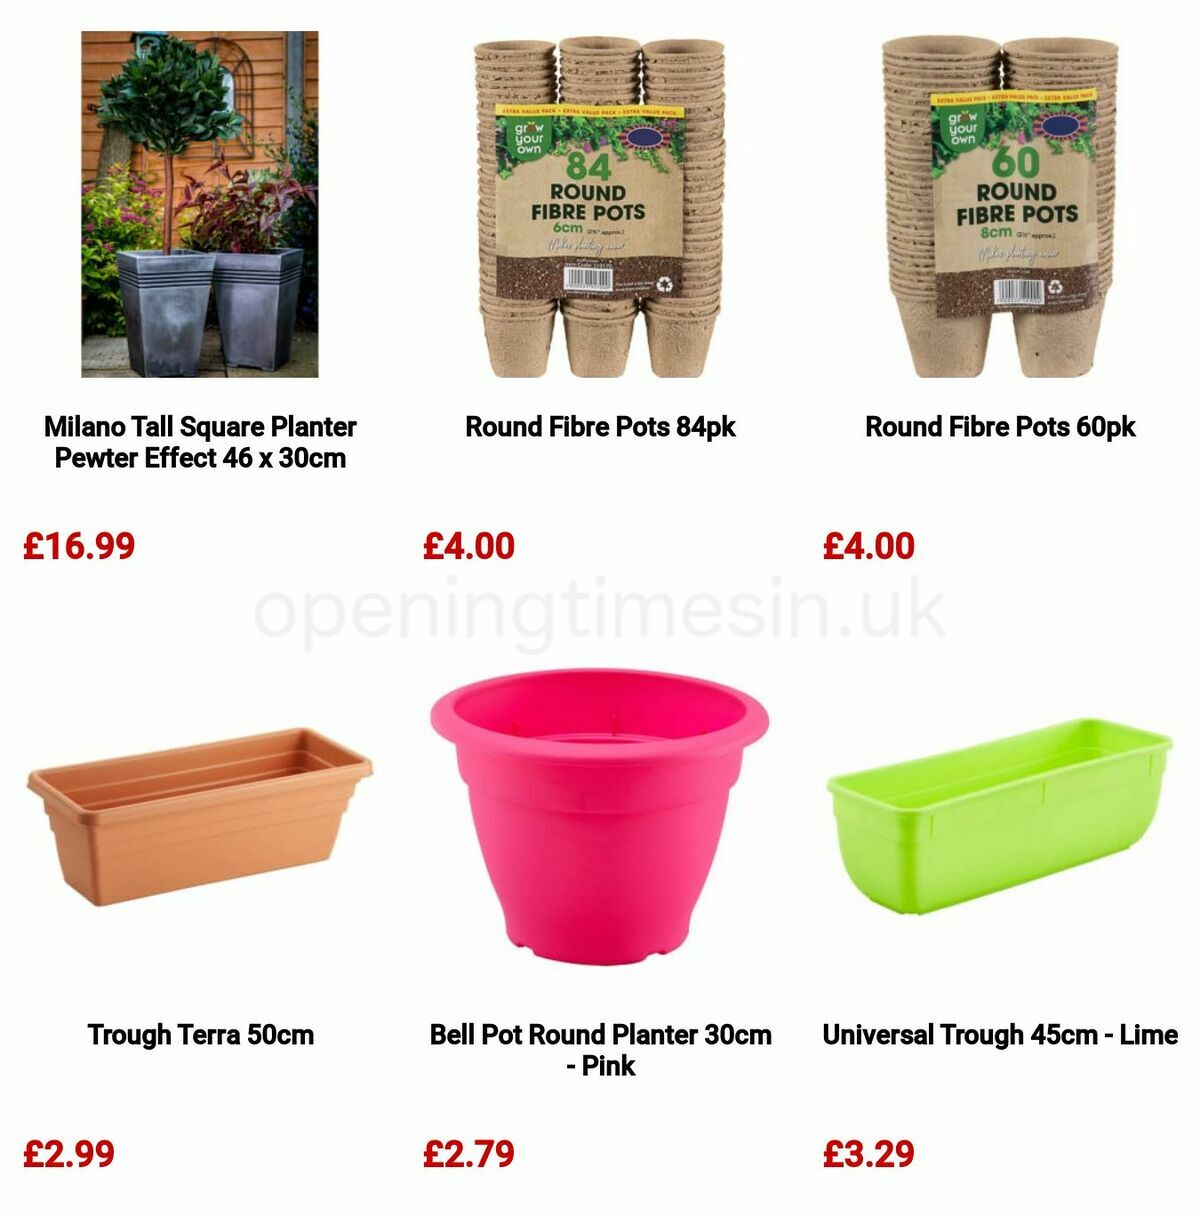 B&M Garden Offers from 28 February